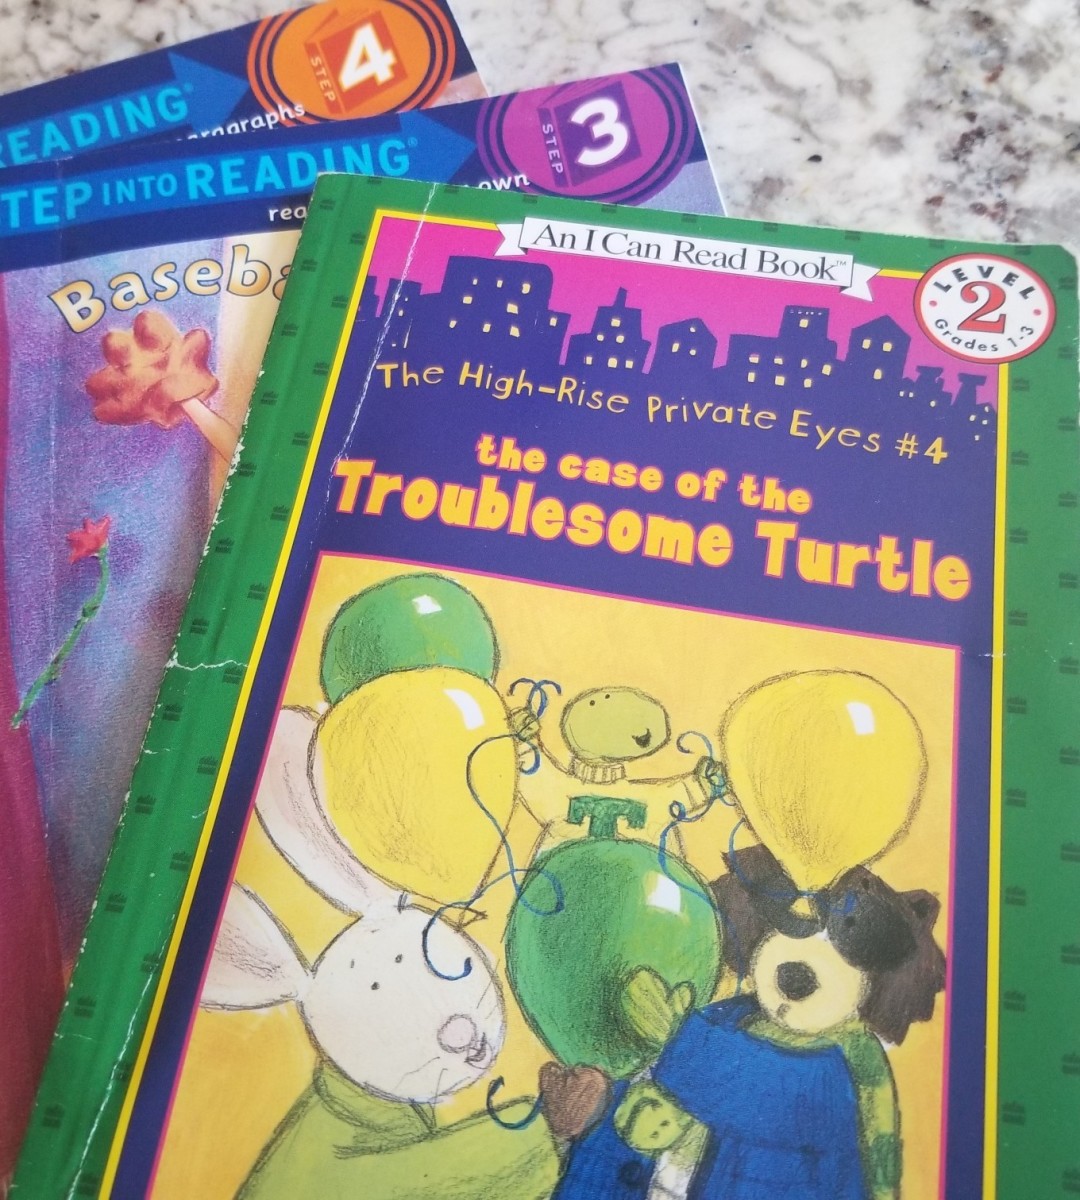 Many books for early readers have reading levels designated on their book covers.